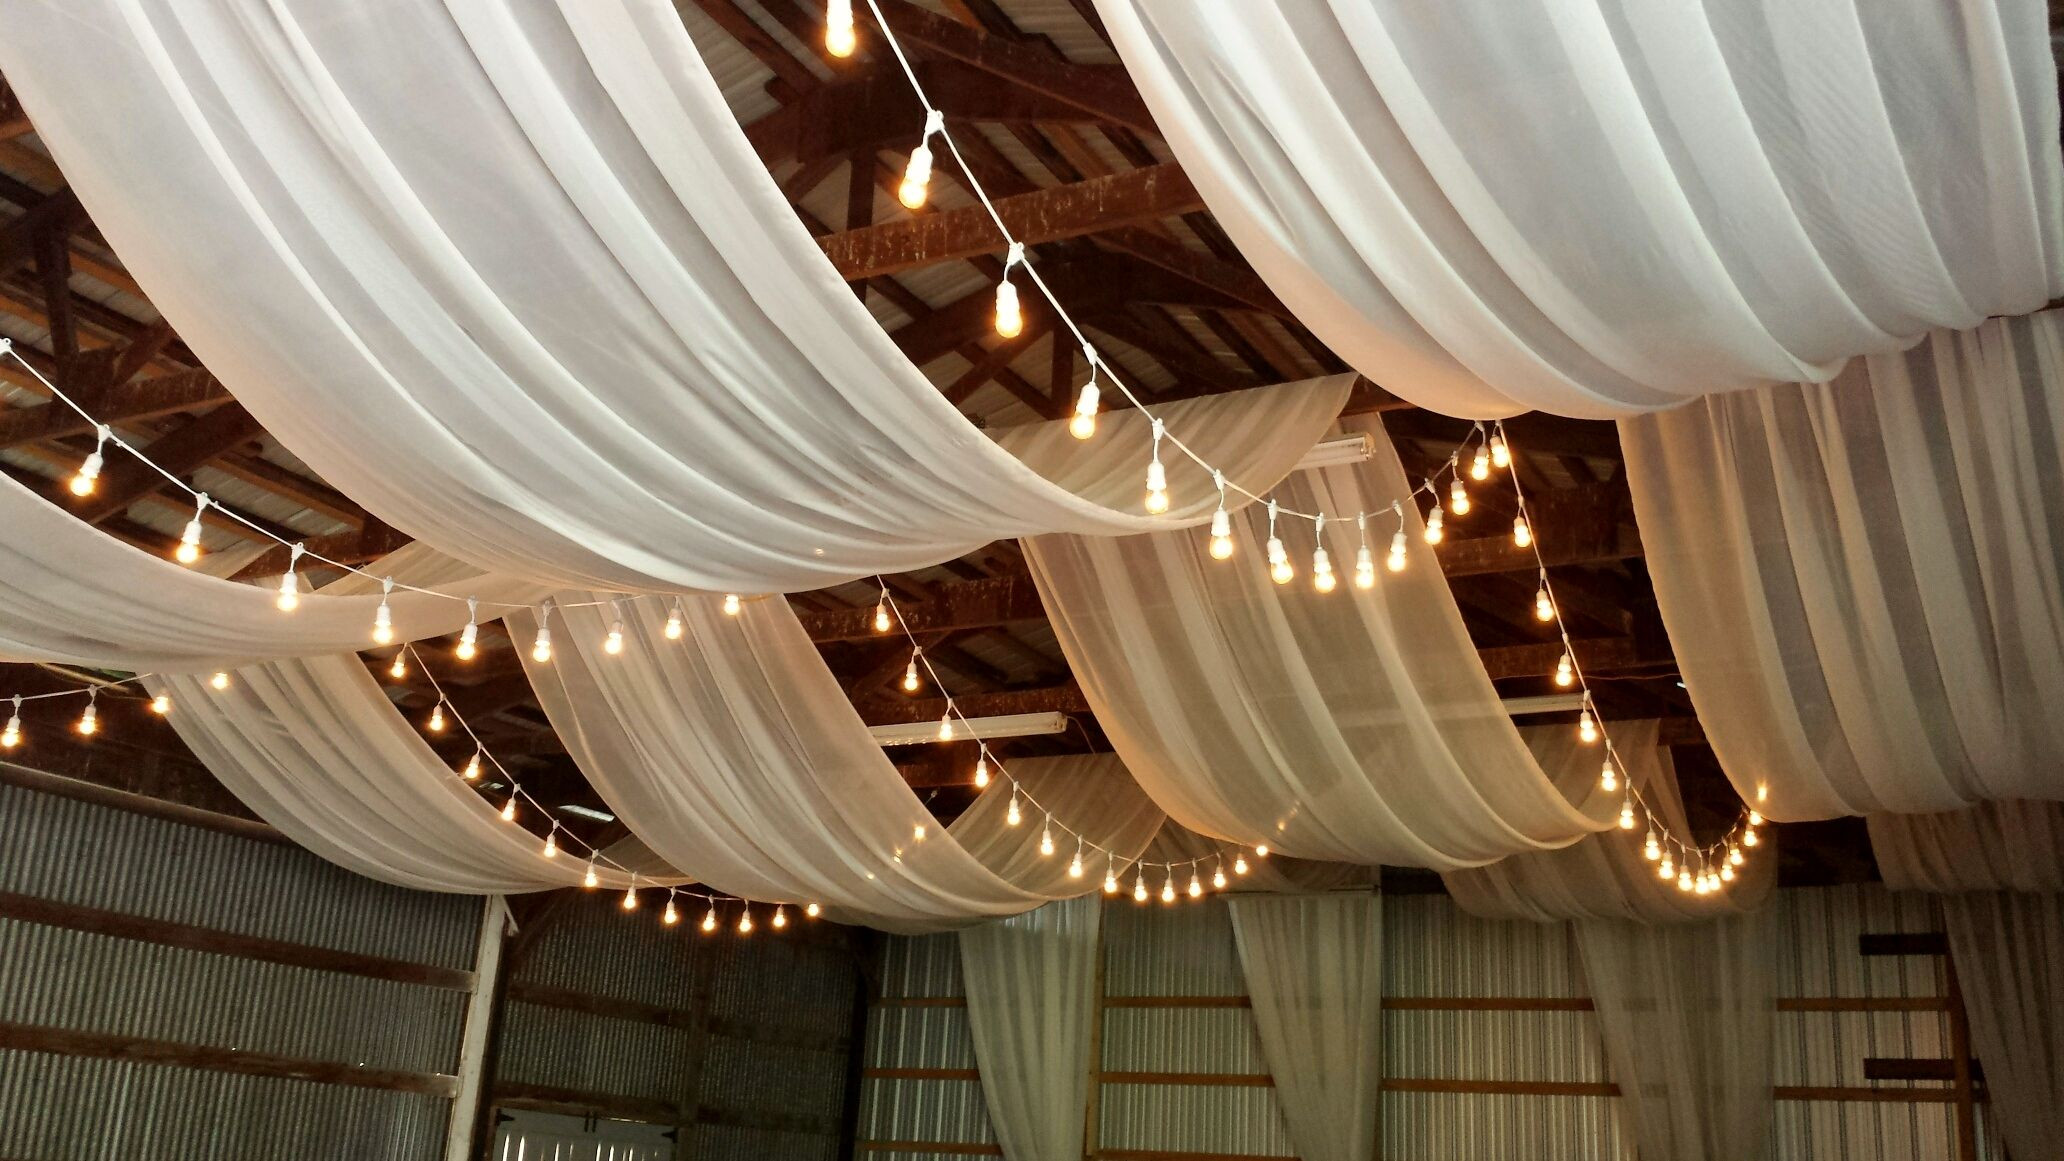 DIY Ceiling Draping For Weddings
 Ceiling draping in a barn This makes a rustic wedding